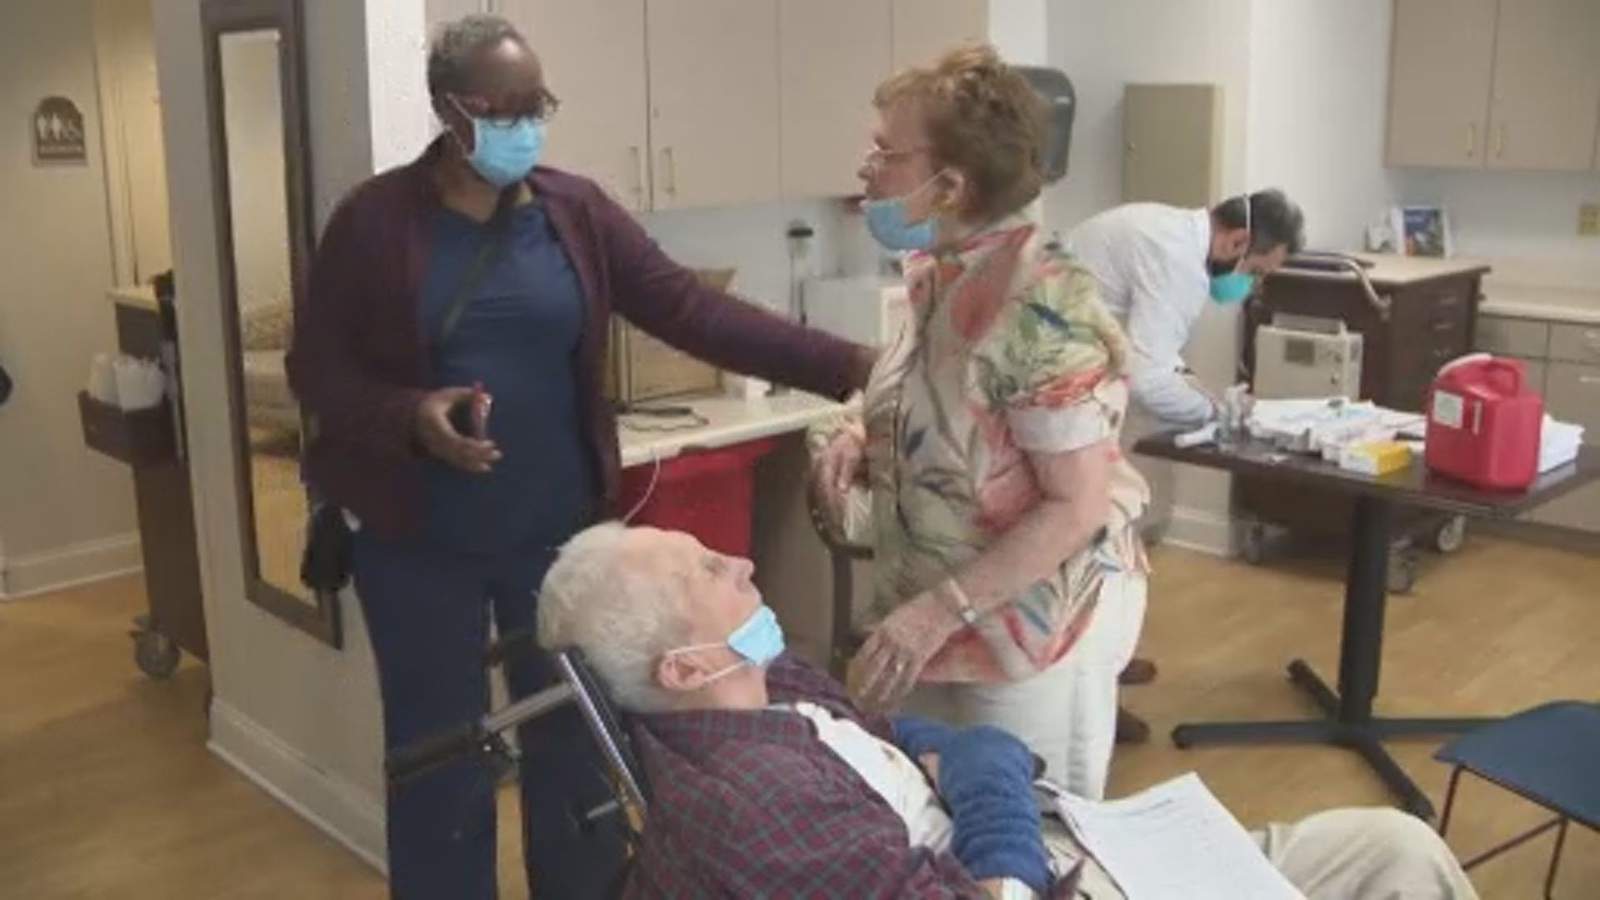 Residents at local senior living facility receive first dose of COVID-19 vaccine